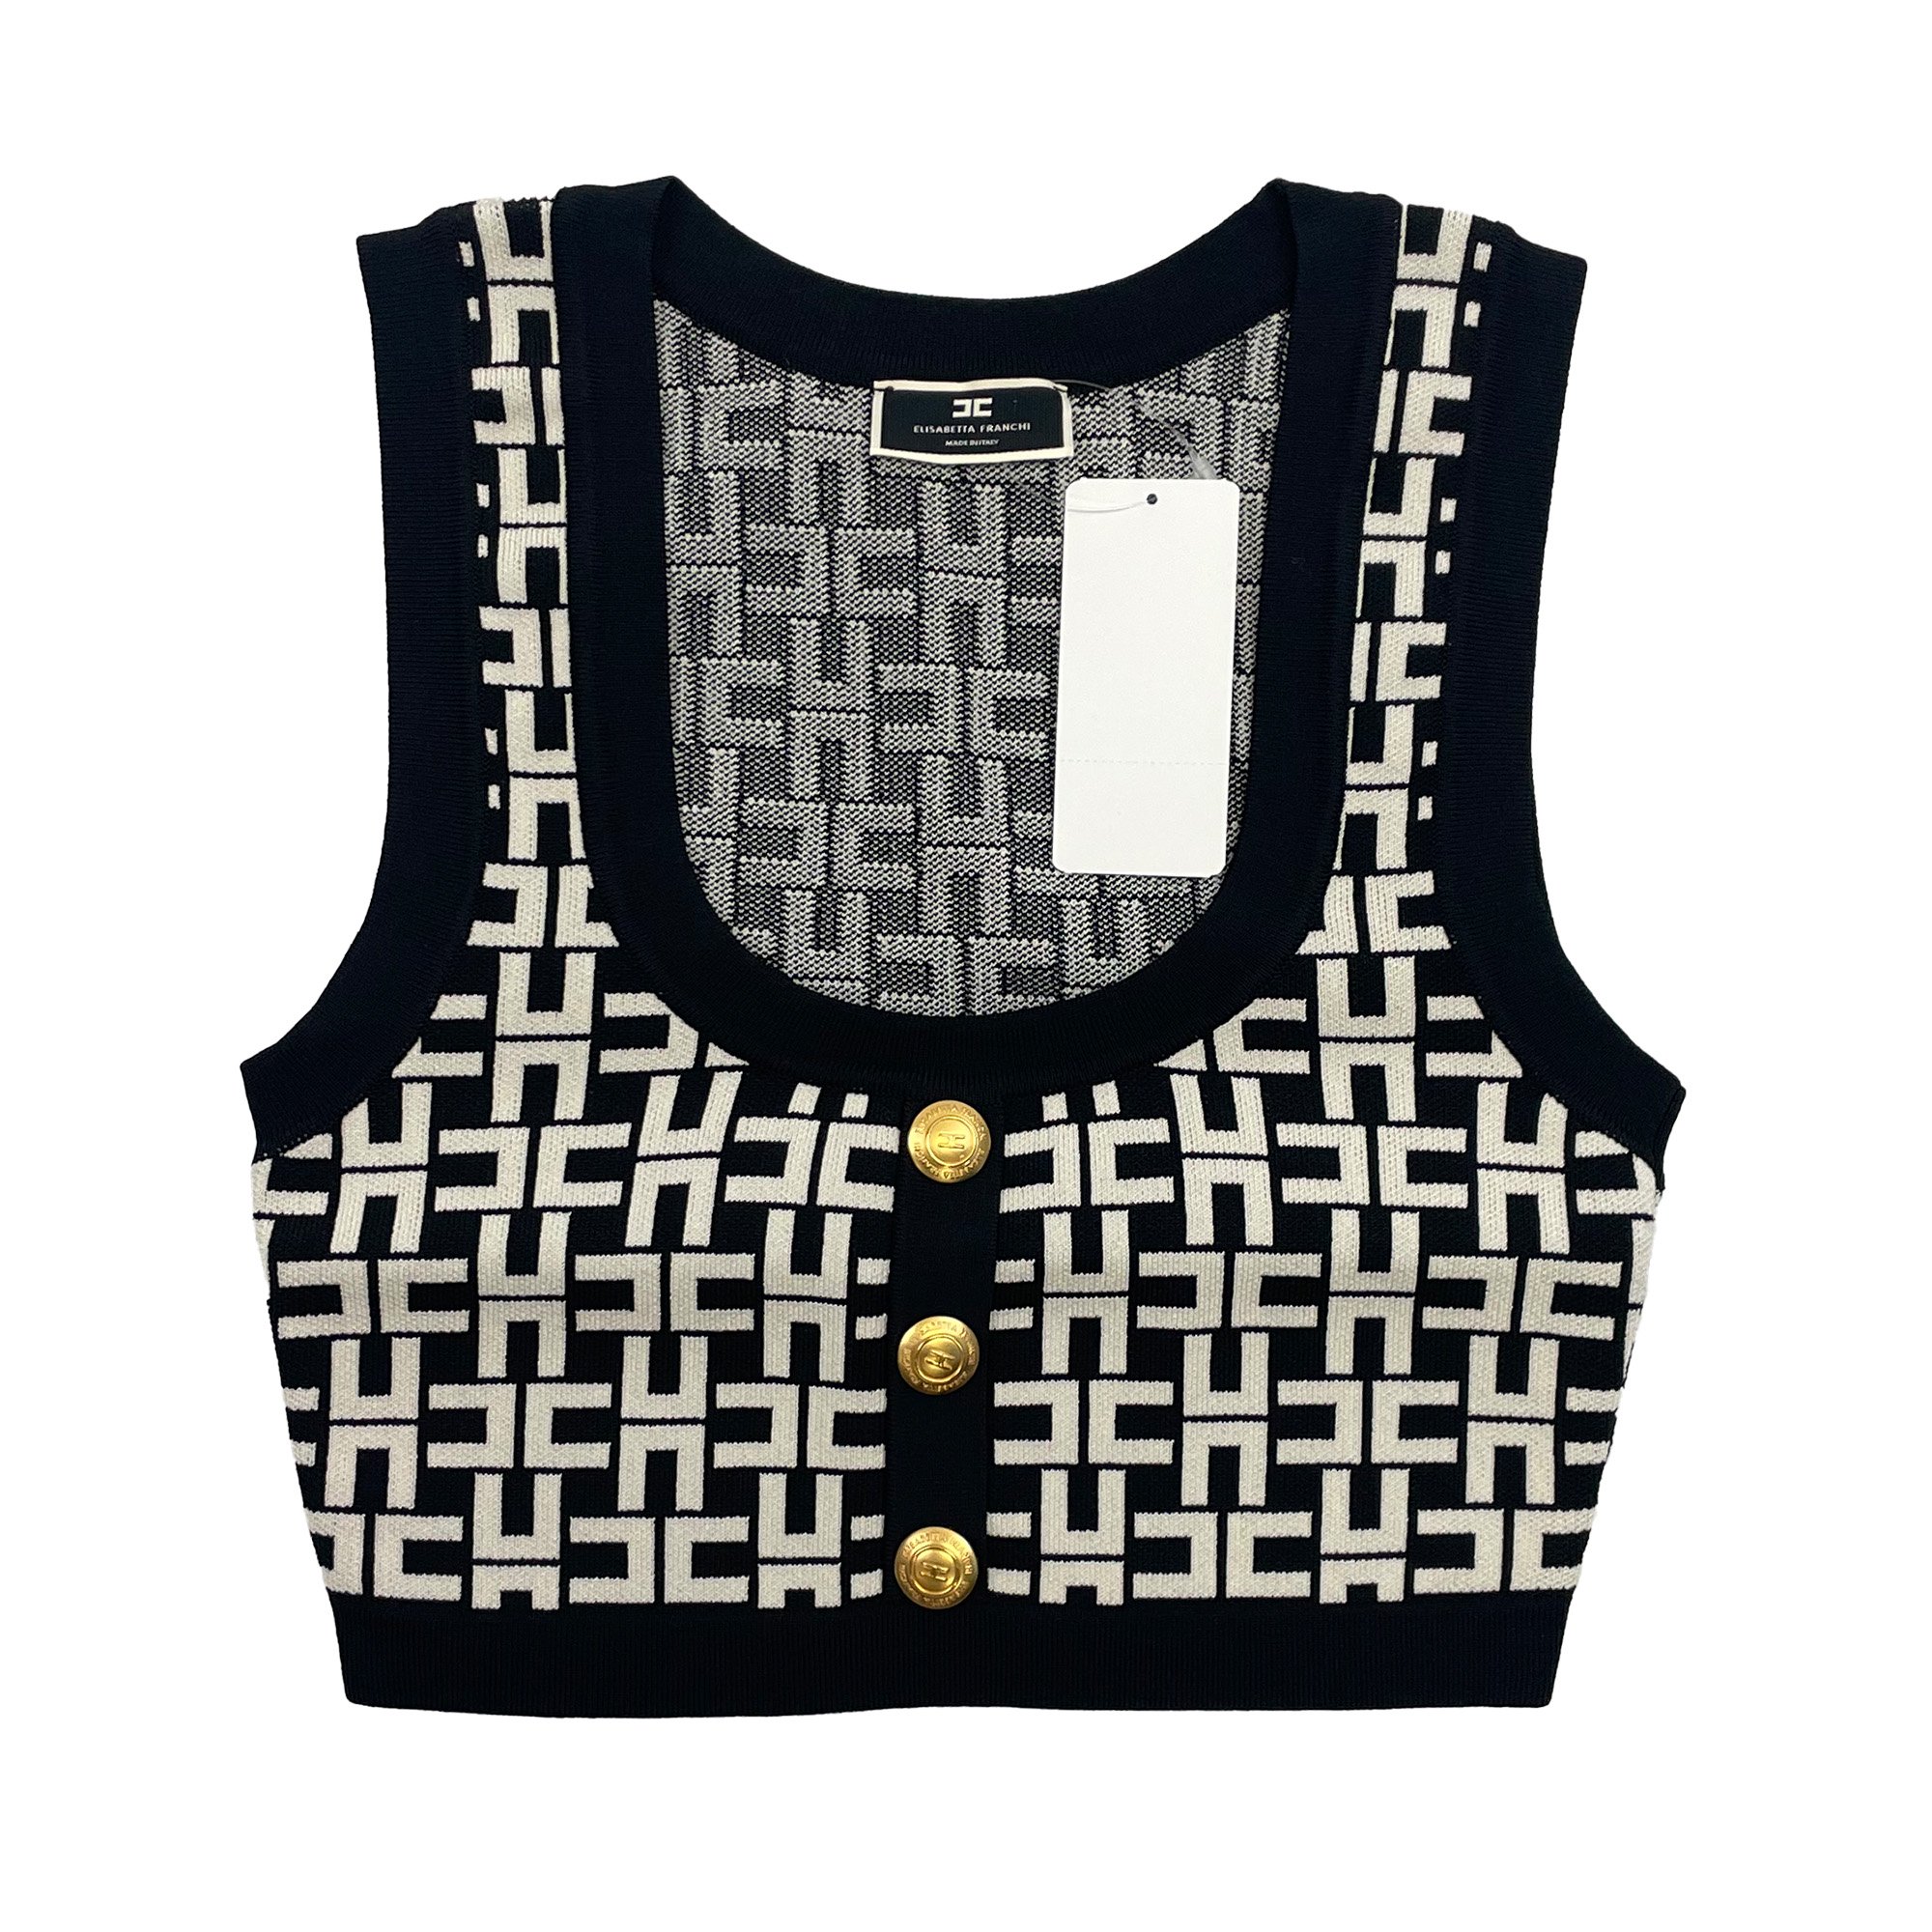 <img class='new_mark_img1' src='https://img.shop-pro.jp/img/new/icons7.gif' style='border:none;display:inline;margin:0px;padding:0px;width:auto;' />ELISABETTA FRANCHI N/S KNIT VEST